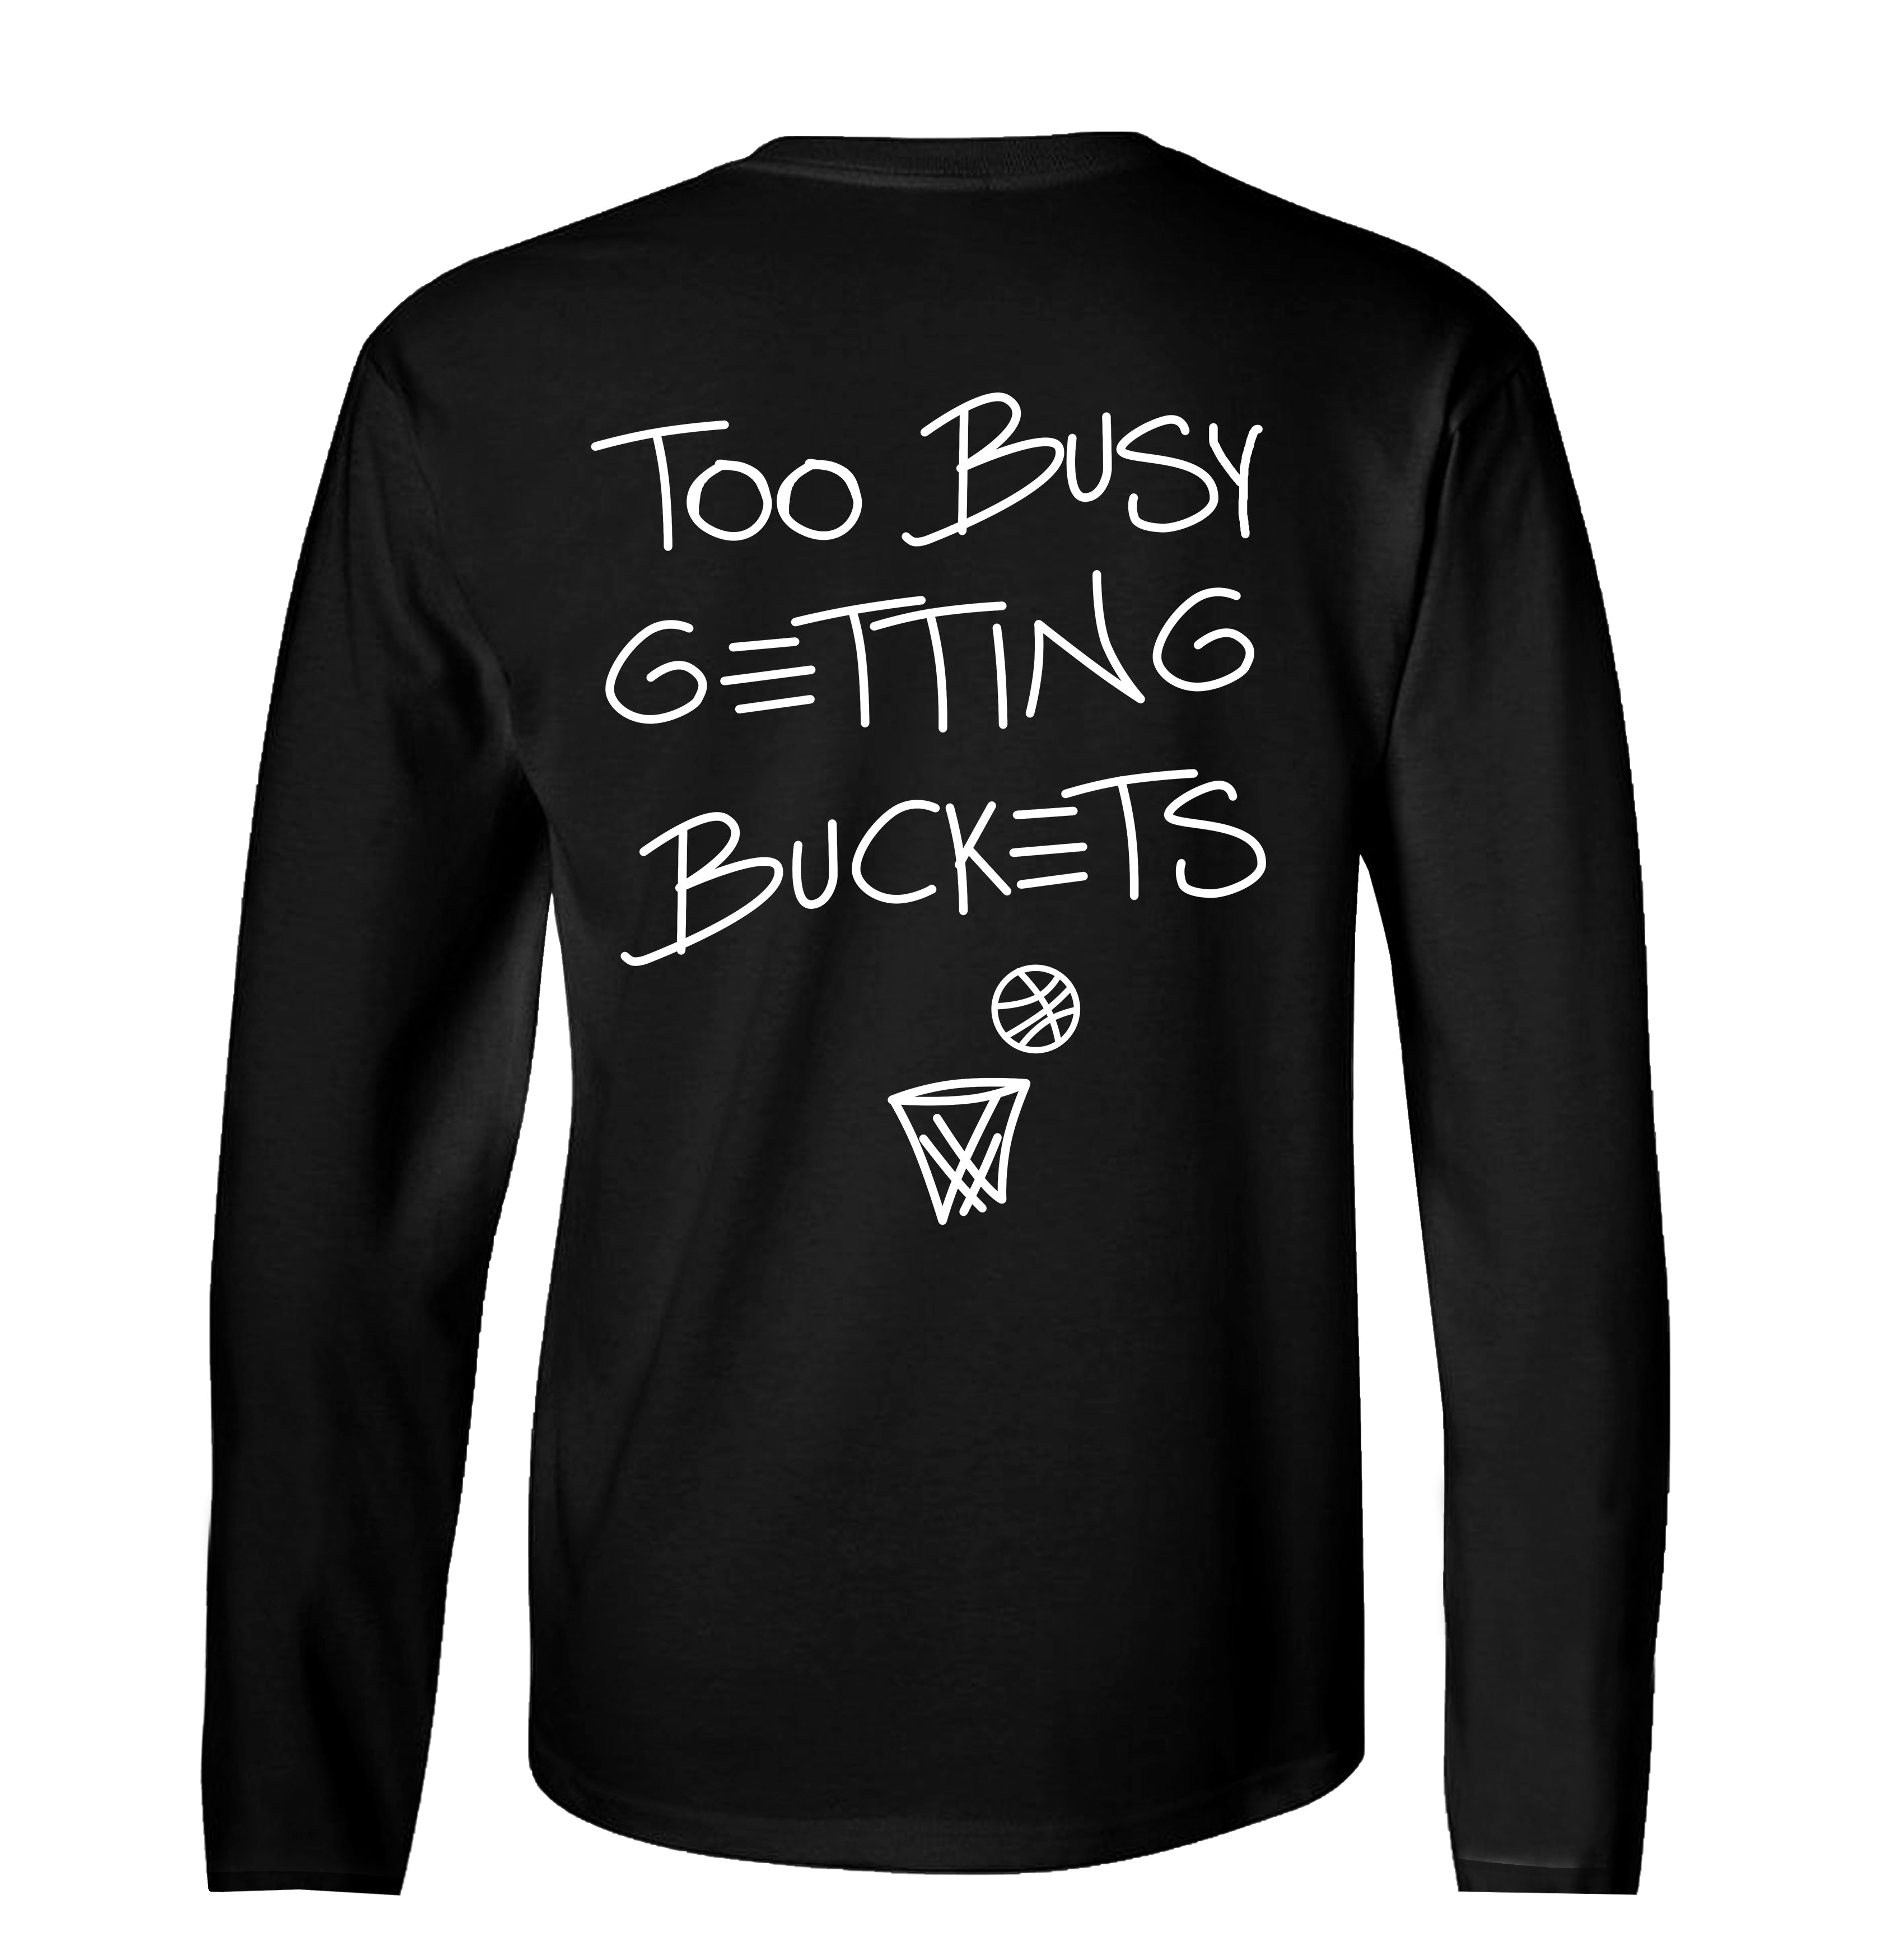 "Too Busy Getting Buckets" Long Sleeve - Black - Youth